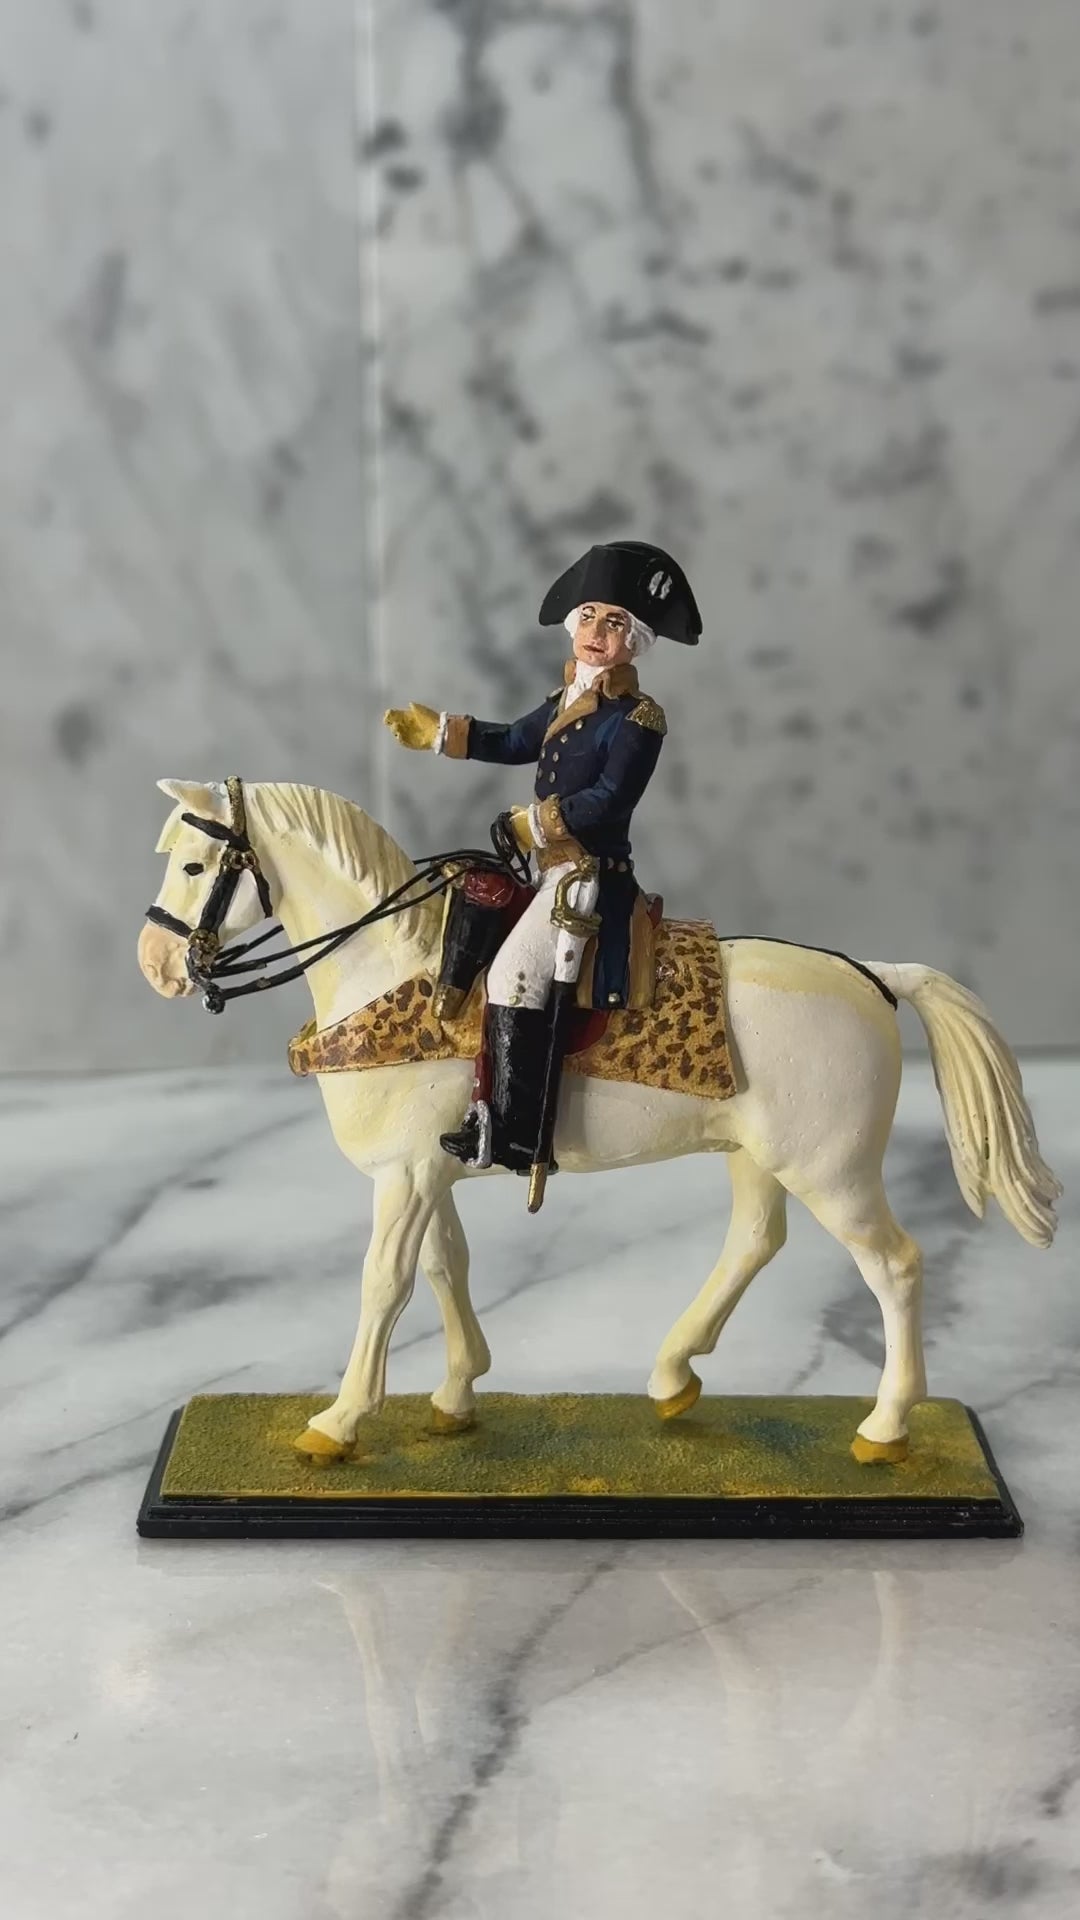 Collectible toy soldier army men George Washington on Horseback. 360 view.